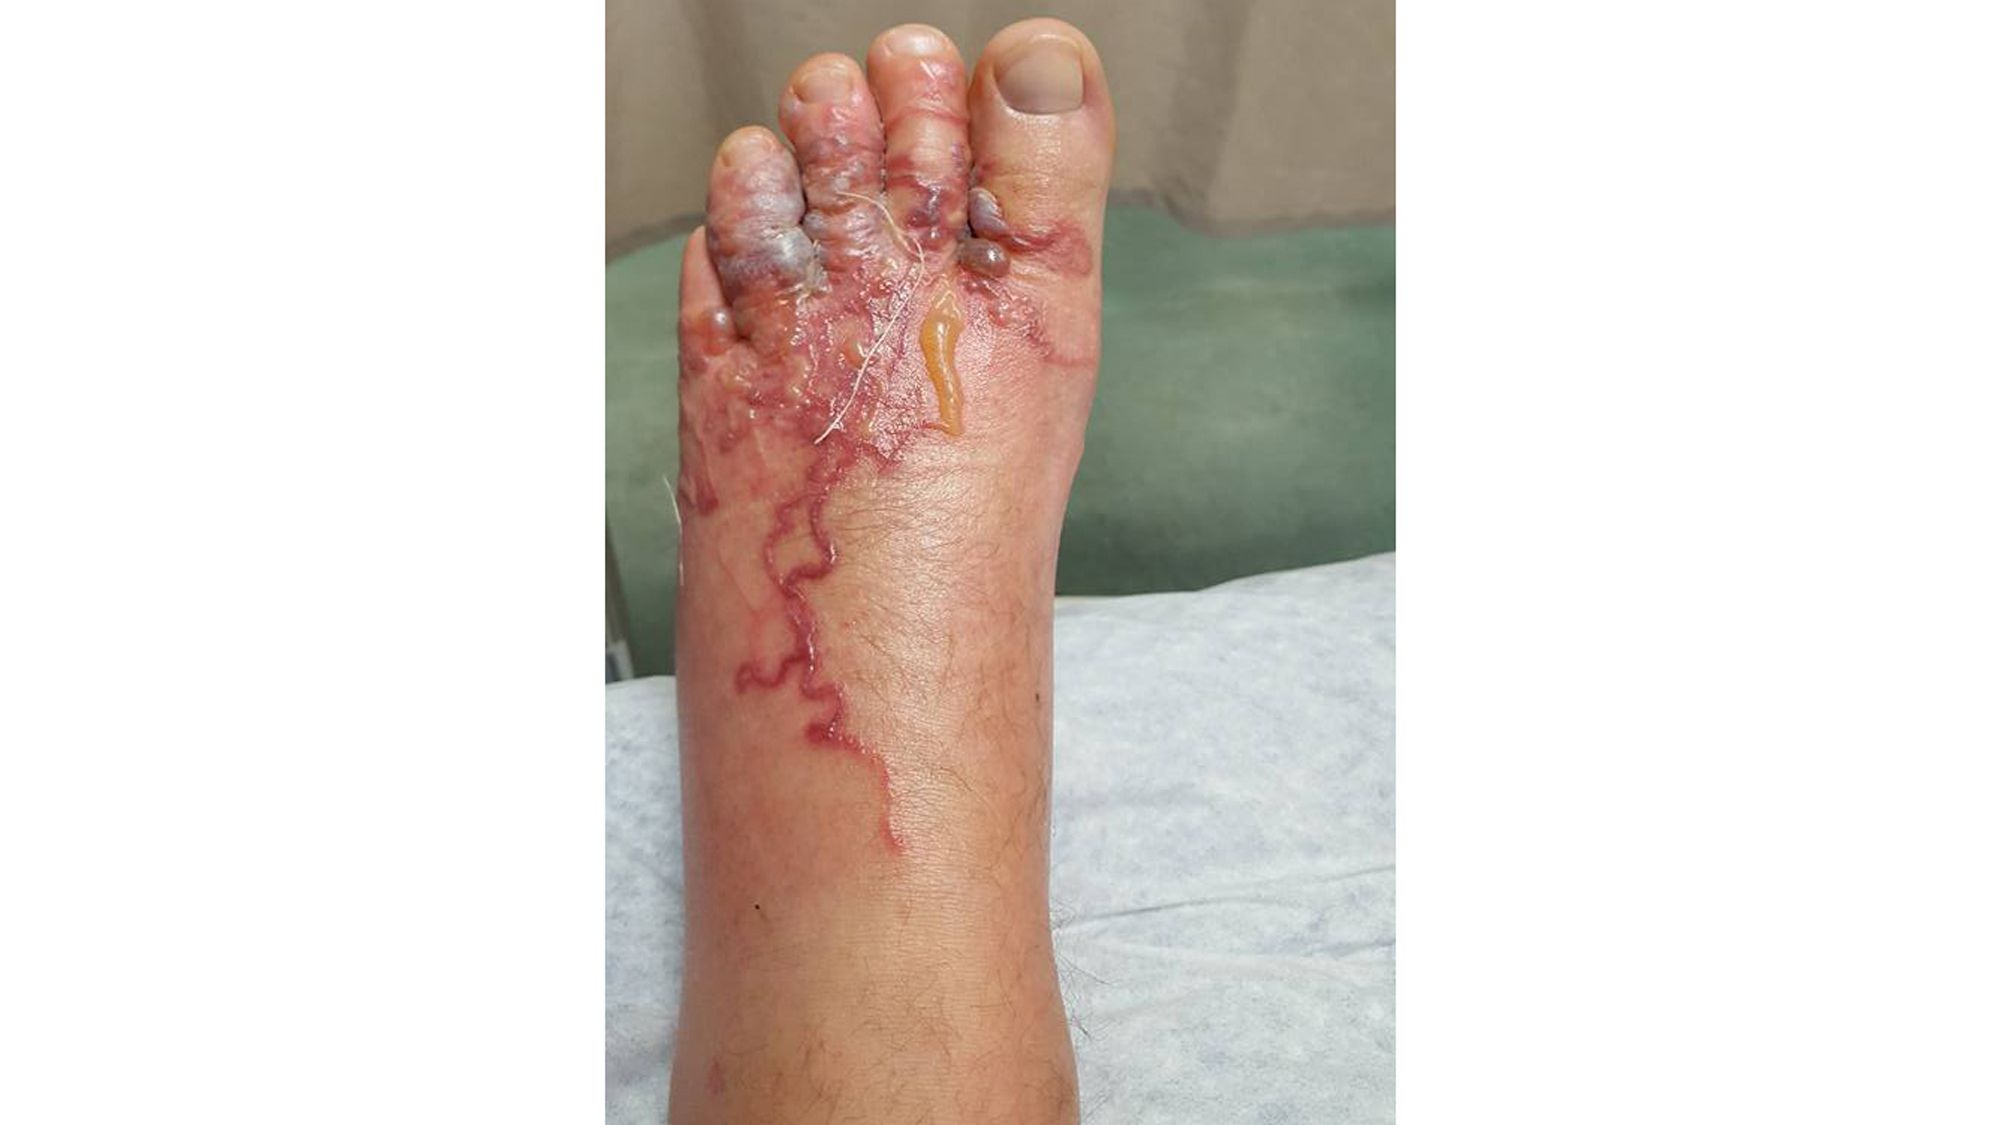 Couple finds worms in their feet after a beach vacation